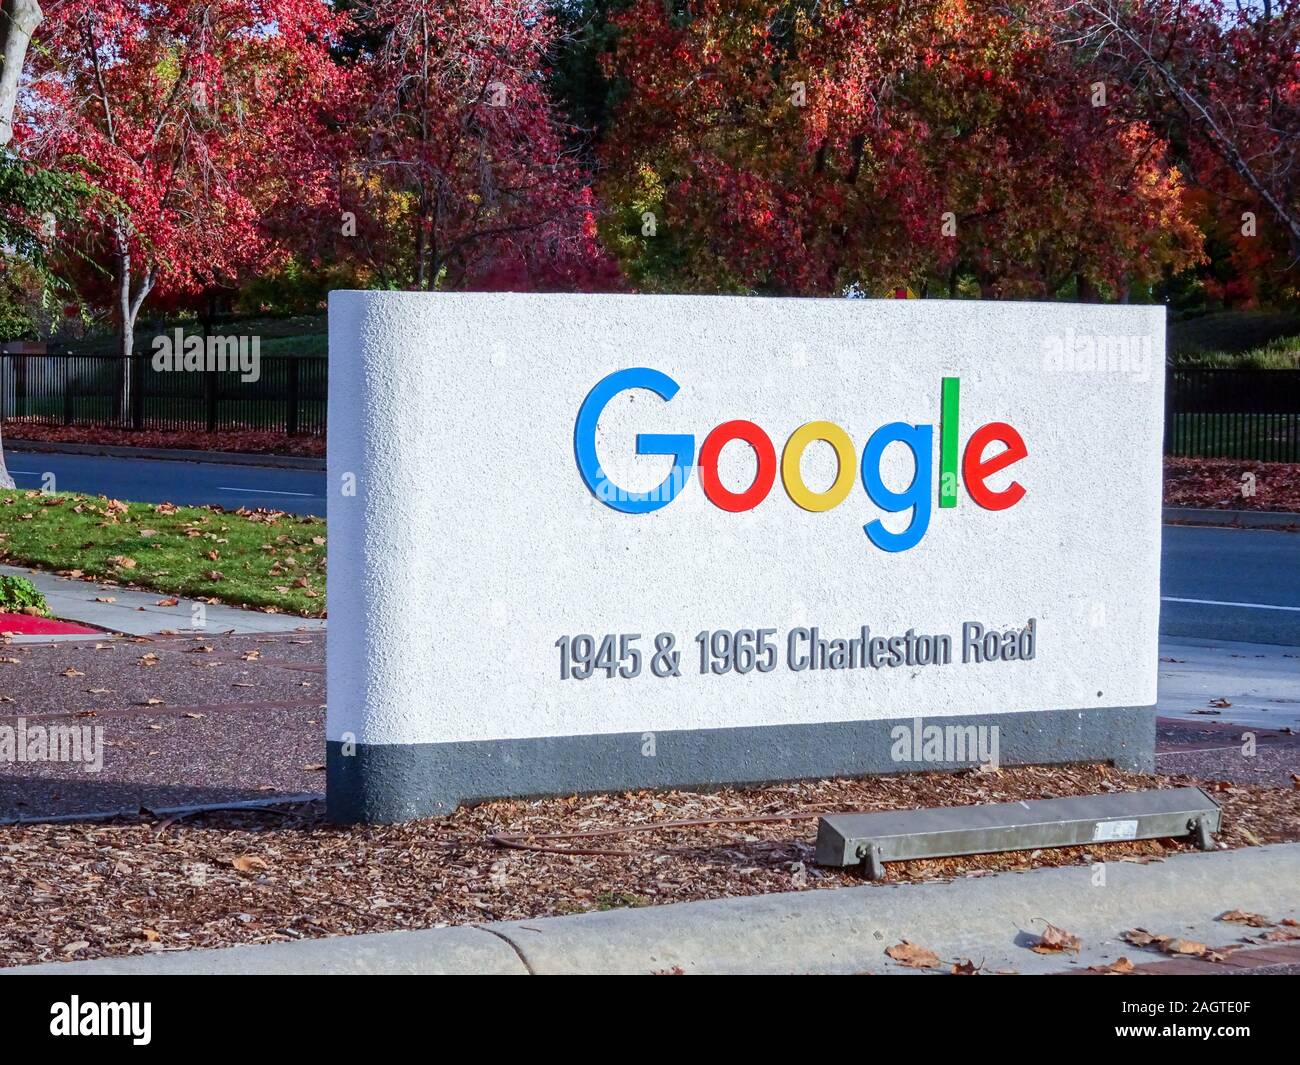 Google logo signage trees with red leaves in fall season on 1945 charleston road, Mountain view, california, USA, Dec 2019 Stock Photo